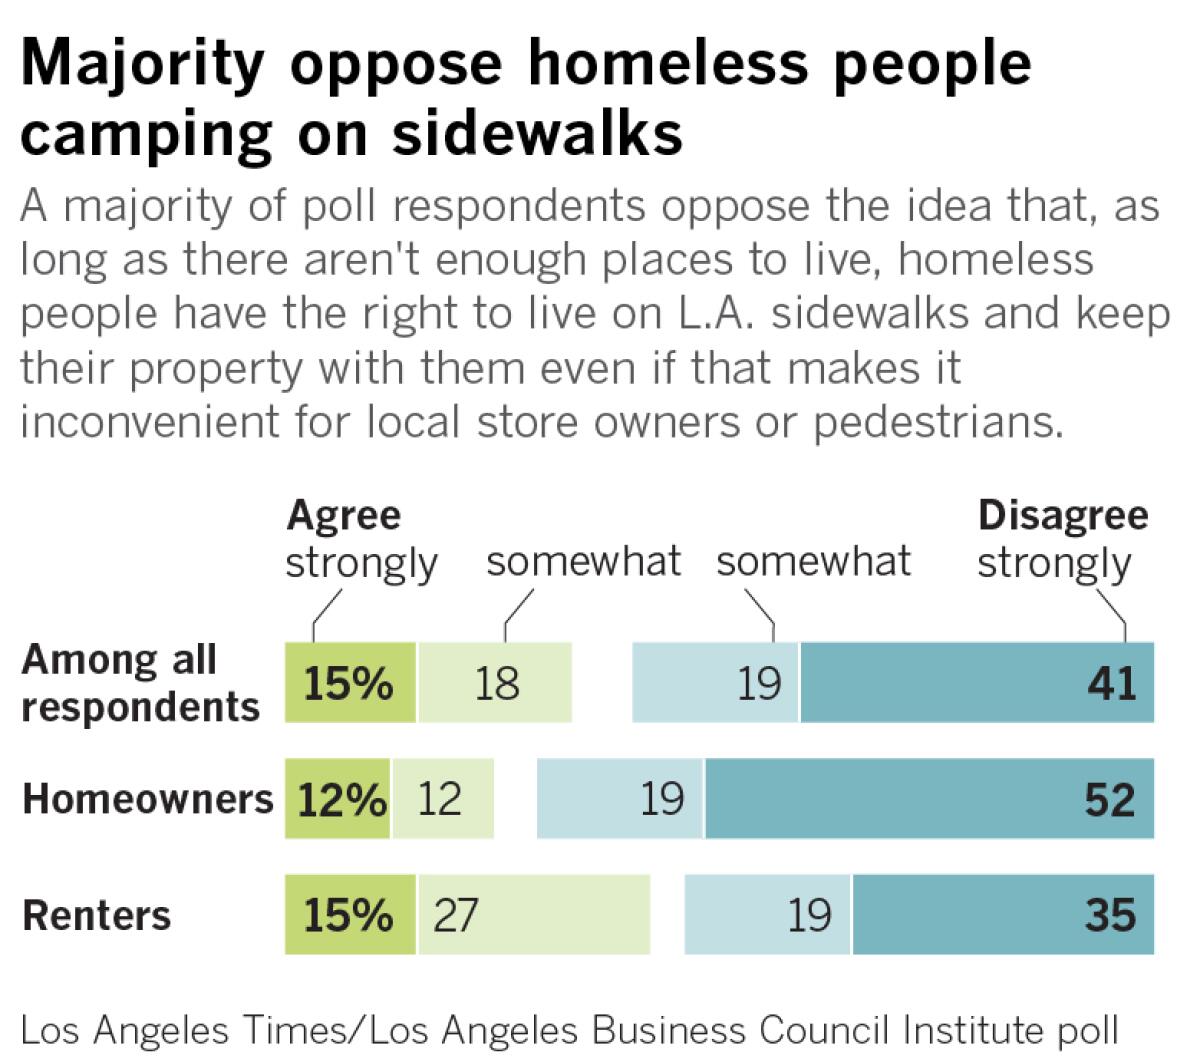 A majority of poll respondents oppose the idea that, as long as there aren't enough places to live, homeless people have the right to live on L.A. sidewalks and keep their property with them even if that makes it inconvenient for local store owners or pedestrians. 